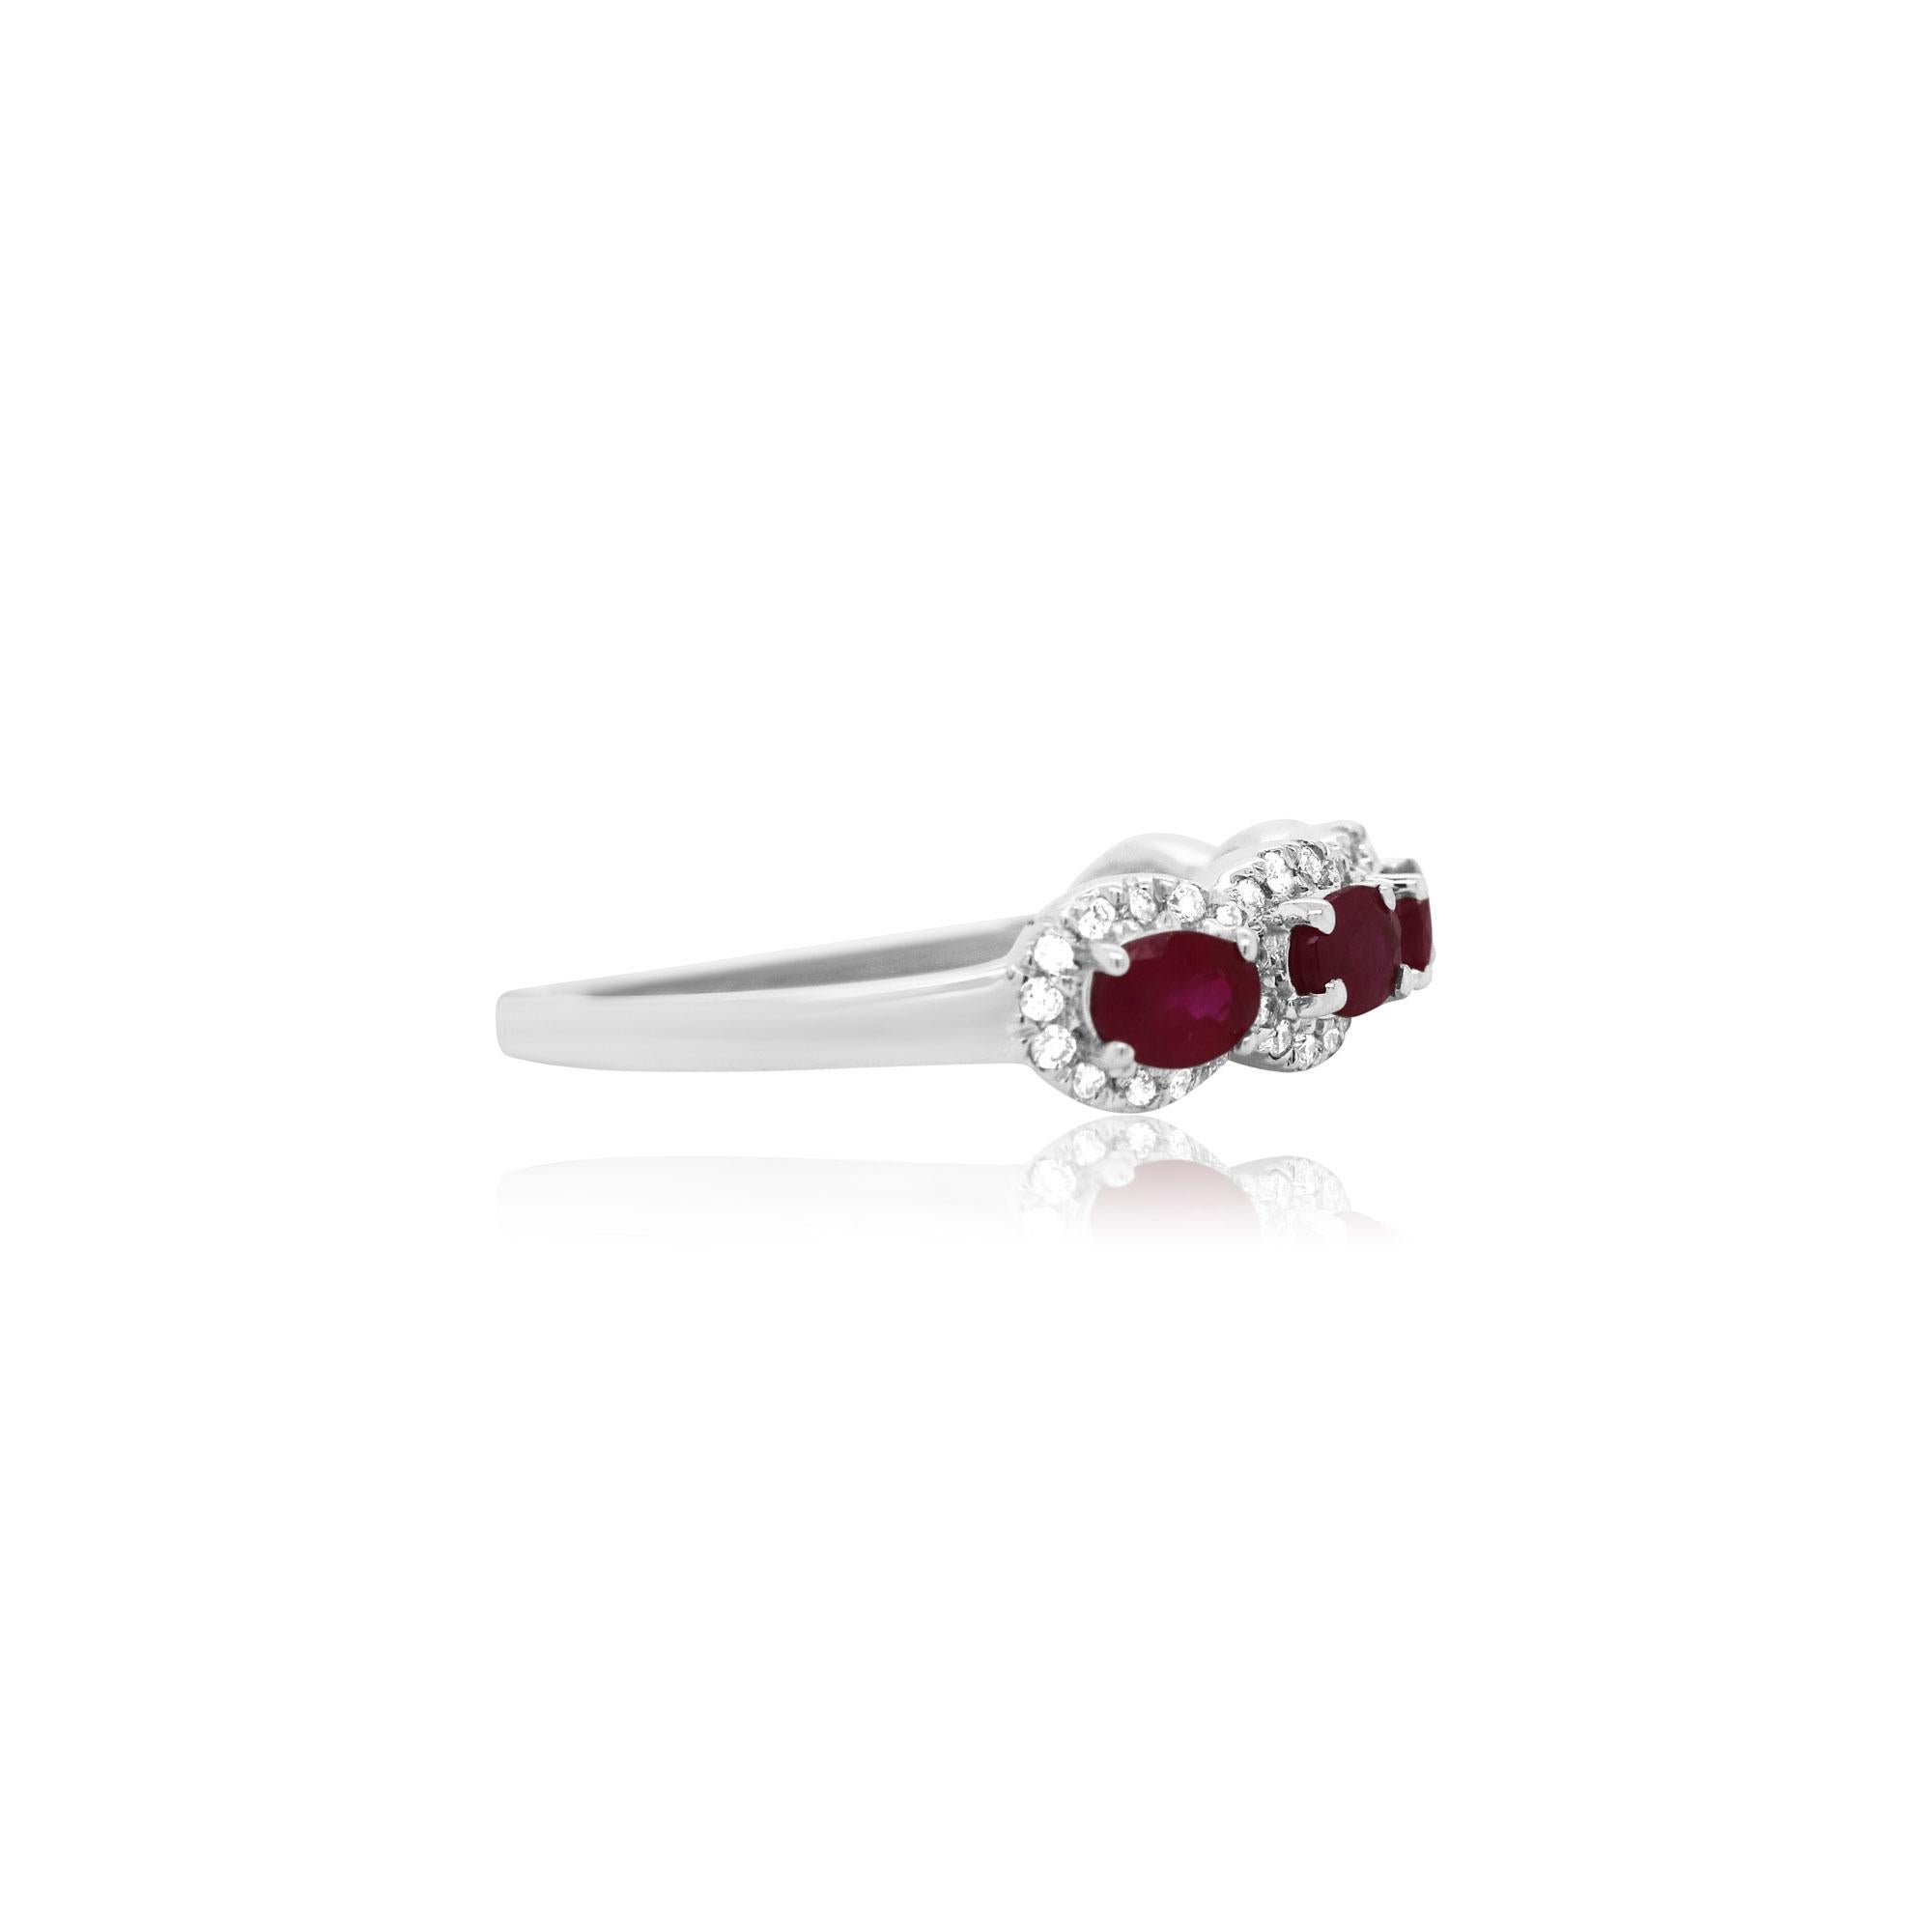 14K White Gold
5 Oval Shaped Rubies at 1.11 Carats Size: 2.8 x 3.7 mm 
60 Round White Brilliant Diamonds at 0.27 Carats Color H - I / Clarity: SI 

Alberto offers complimentary sizing on all rings.

Fine one-of-a-kind craftsmanship meets incredible